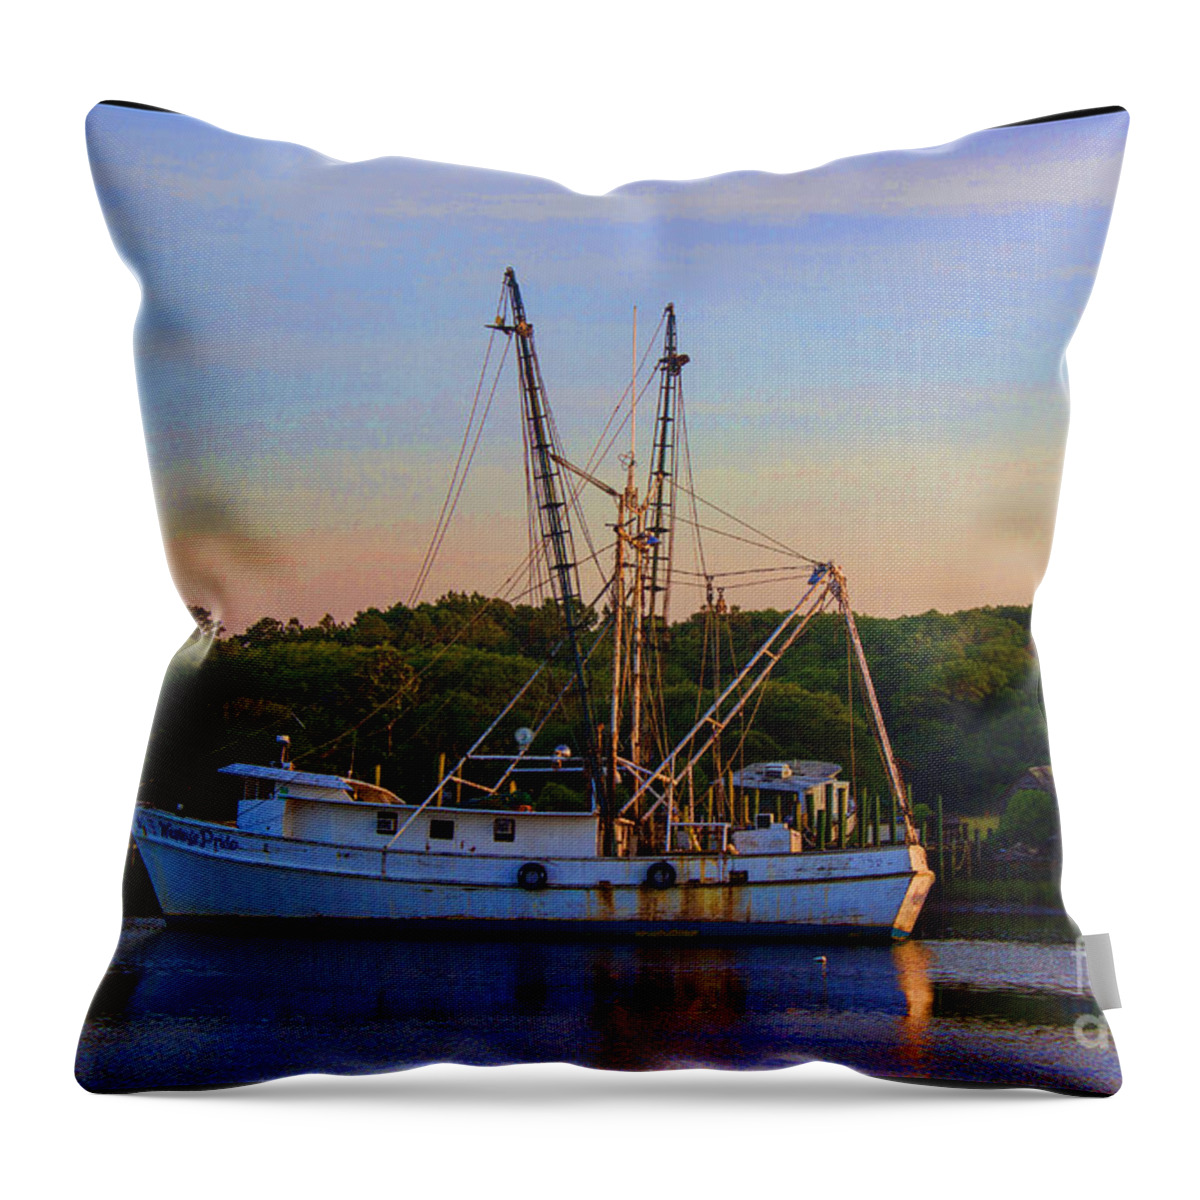 Shrimper Throw Pillow featuring the photograph Old Shrimper by Roberta Byram